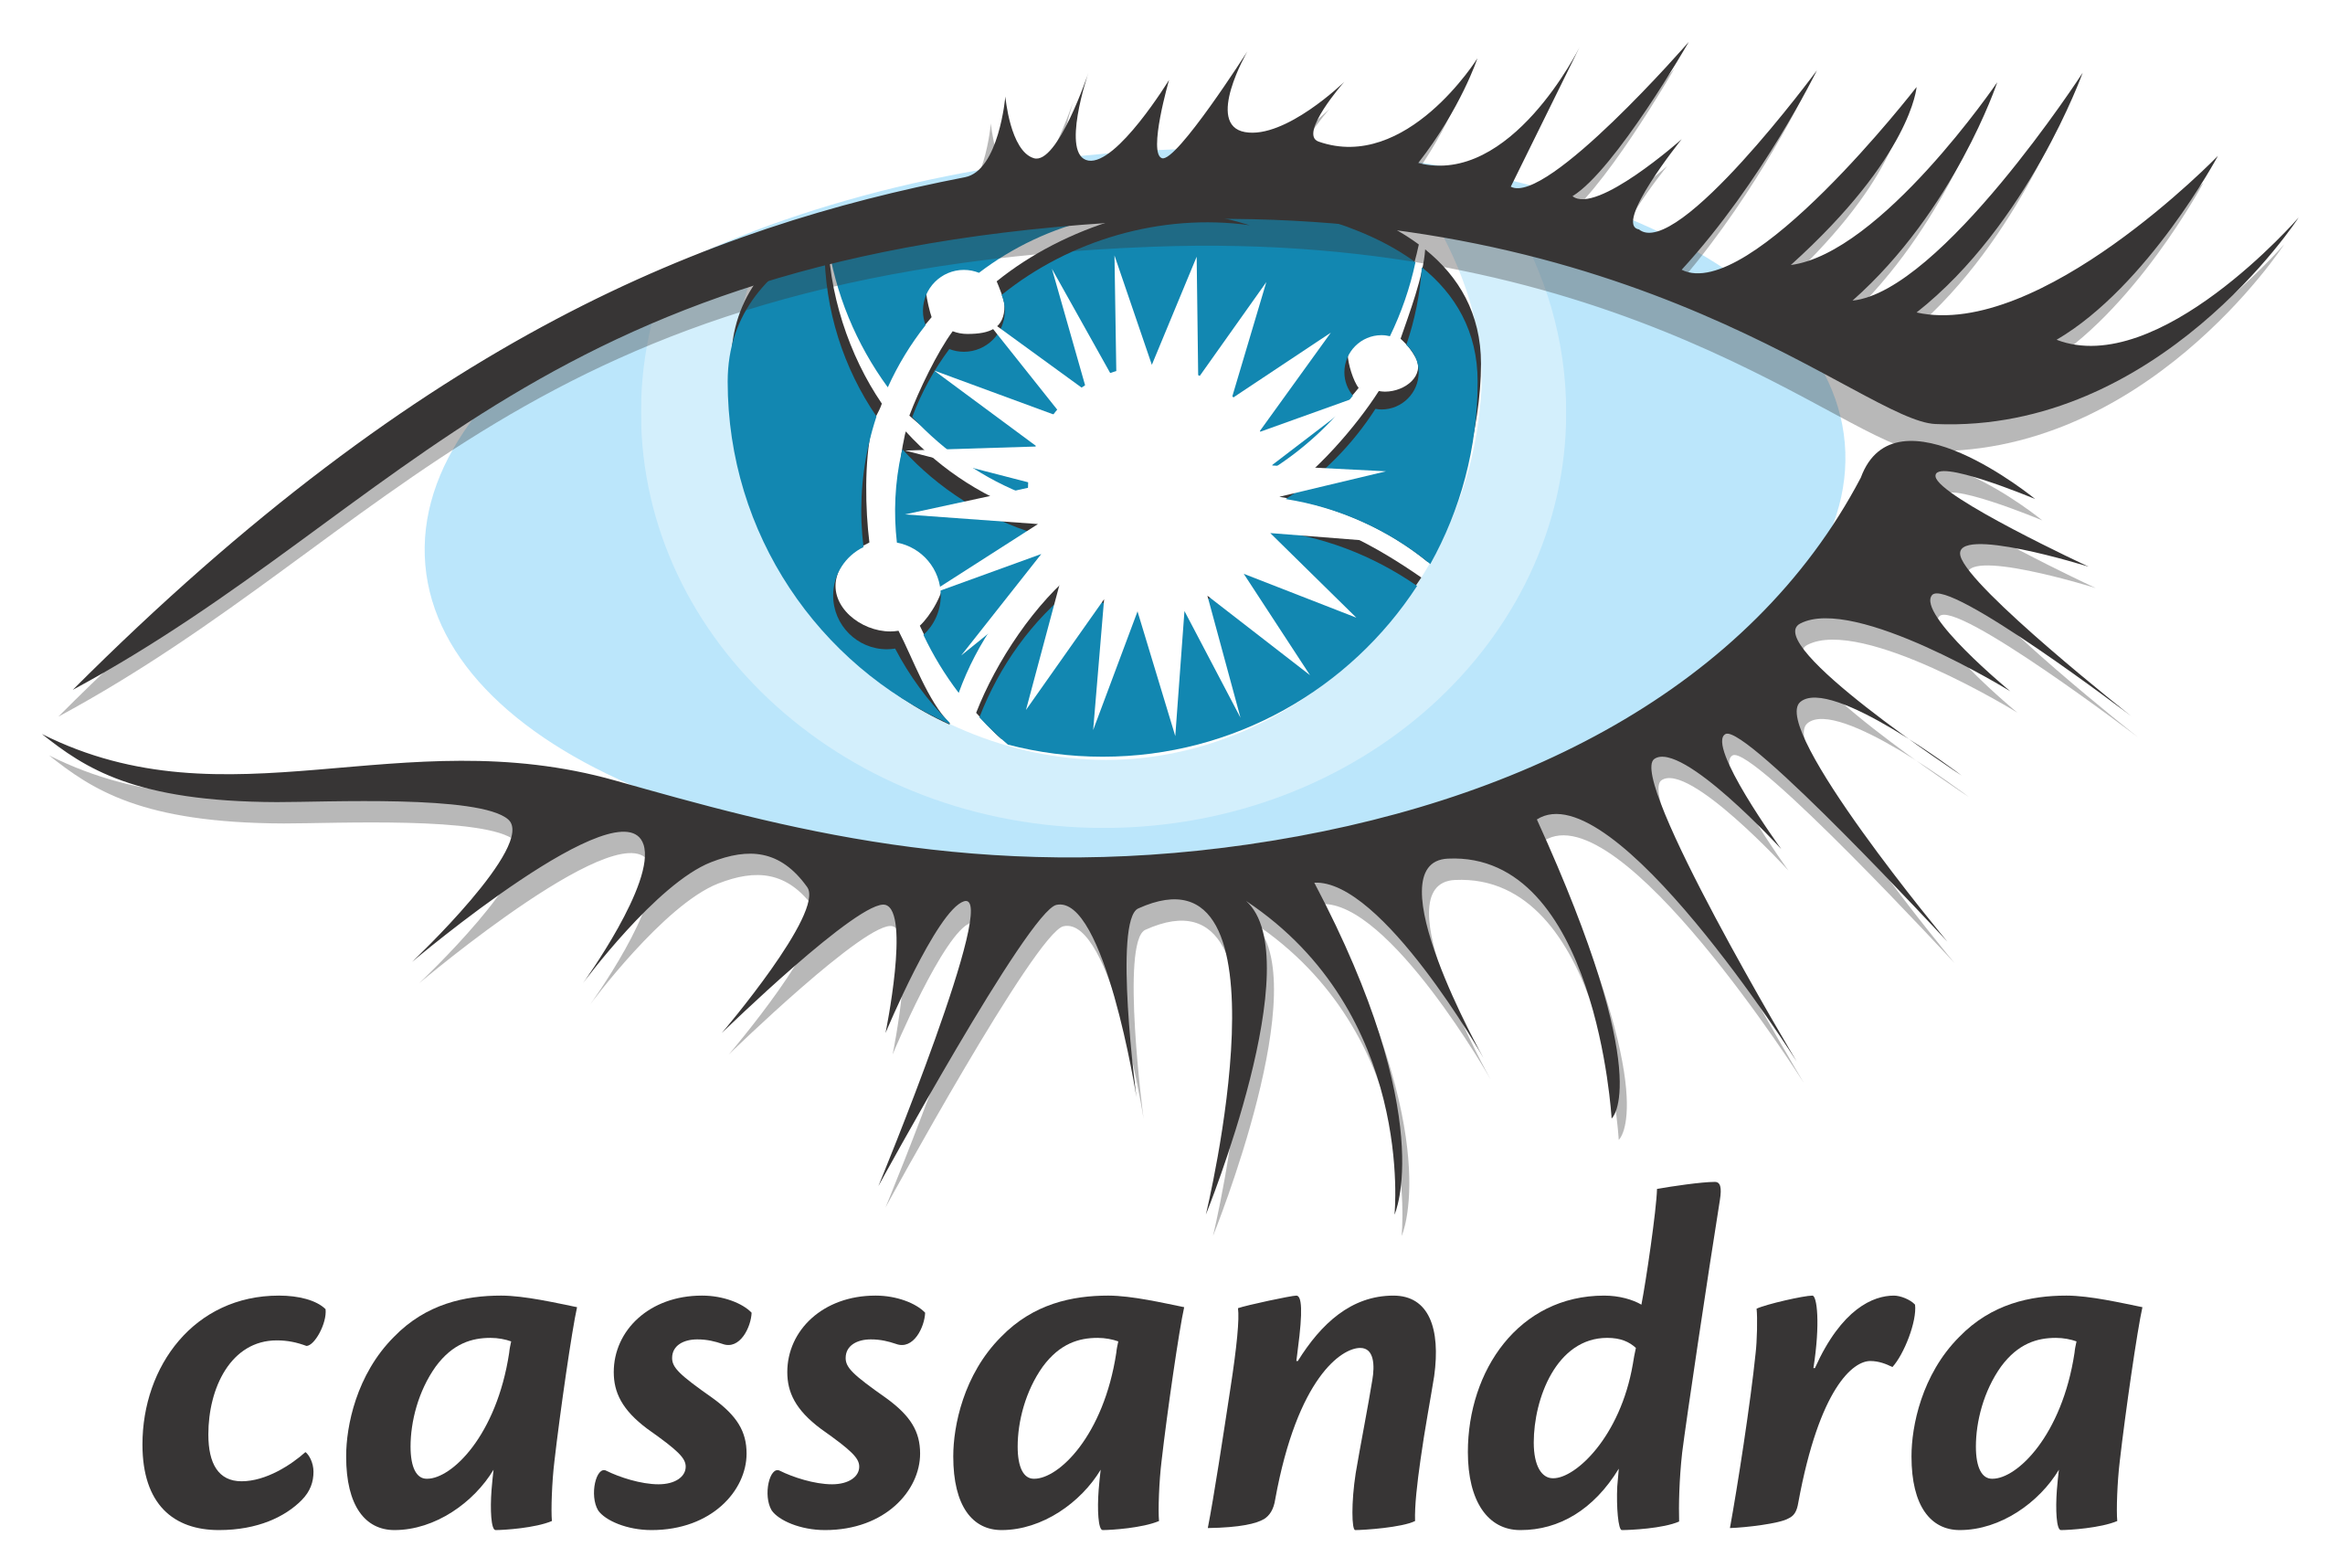 How to Install Cassandra on Fedora - Featured